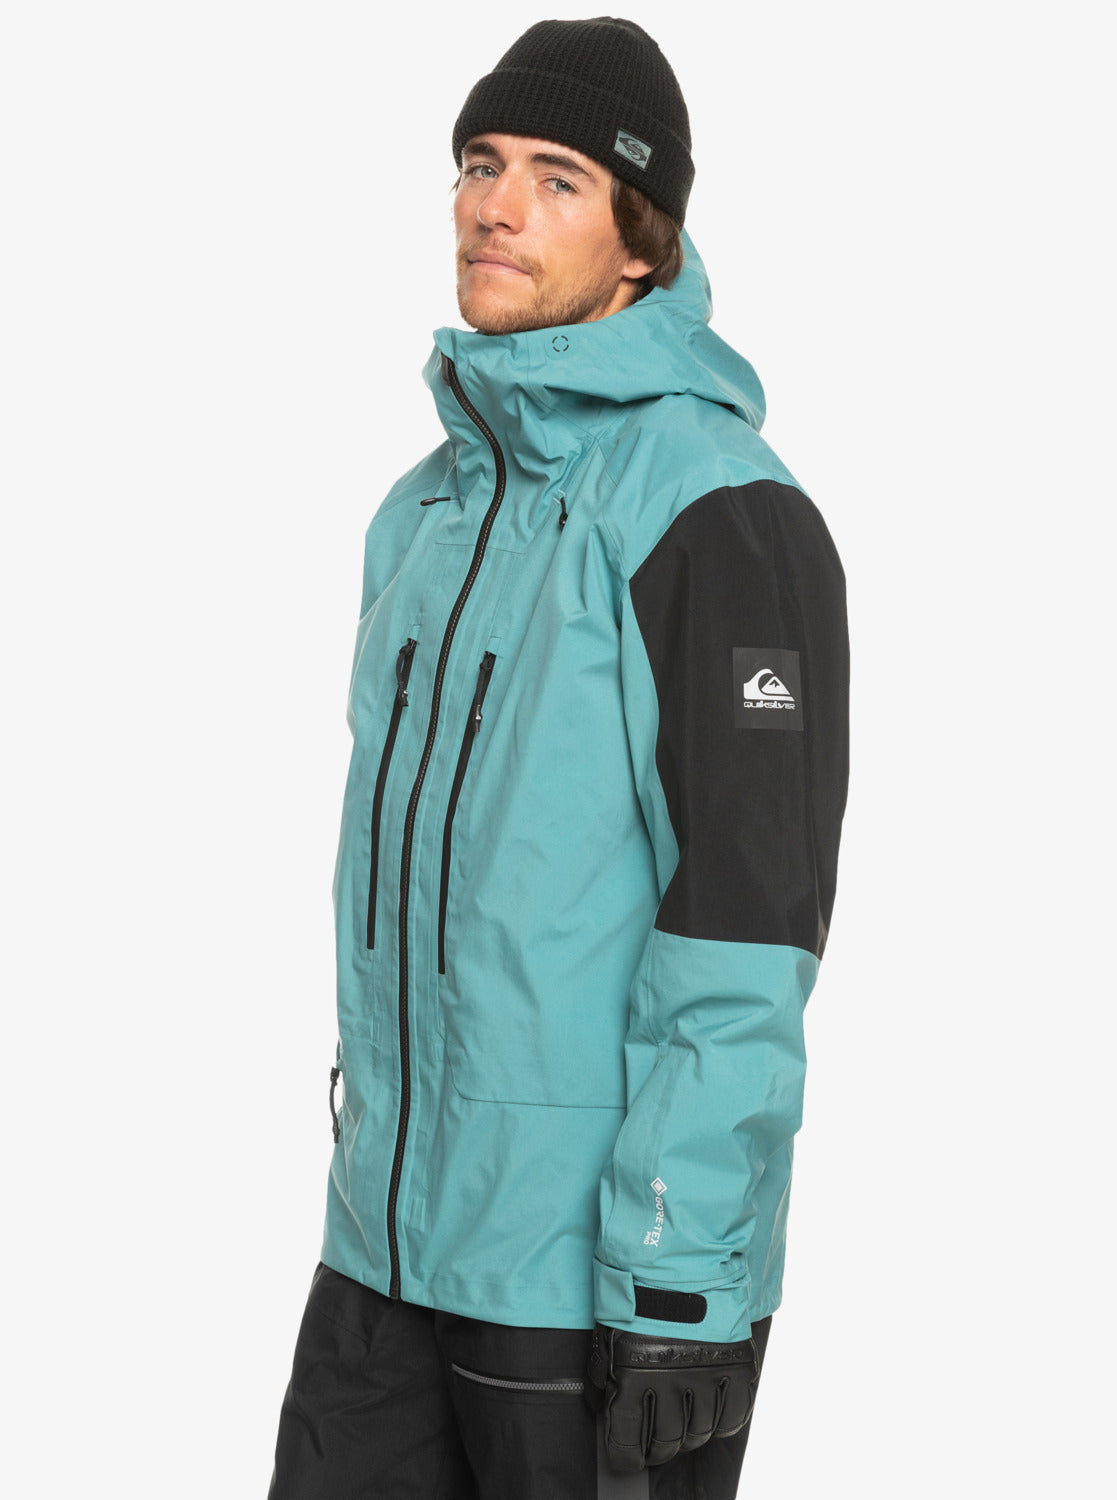 Highline Pro Travis Rice 3L Gore-Tex® Technical Snow Jacket - Brittany